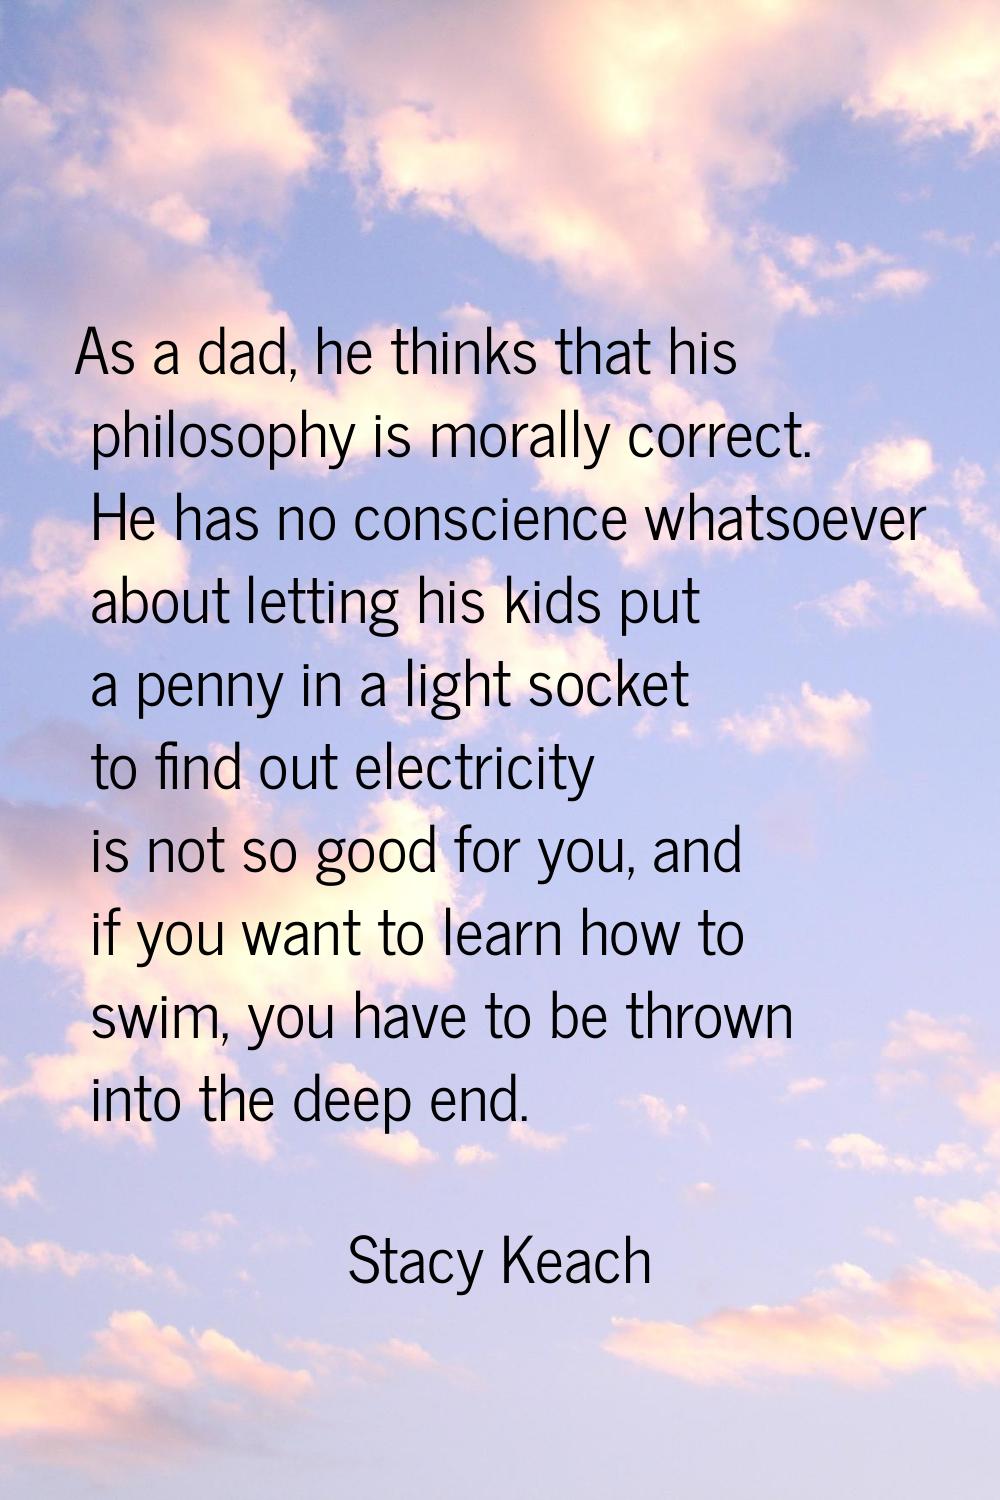 As a dad, he thinks that his philosophy is morally correct. He has no conscience whatsoever about l